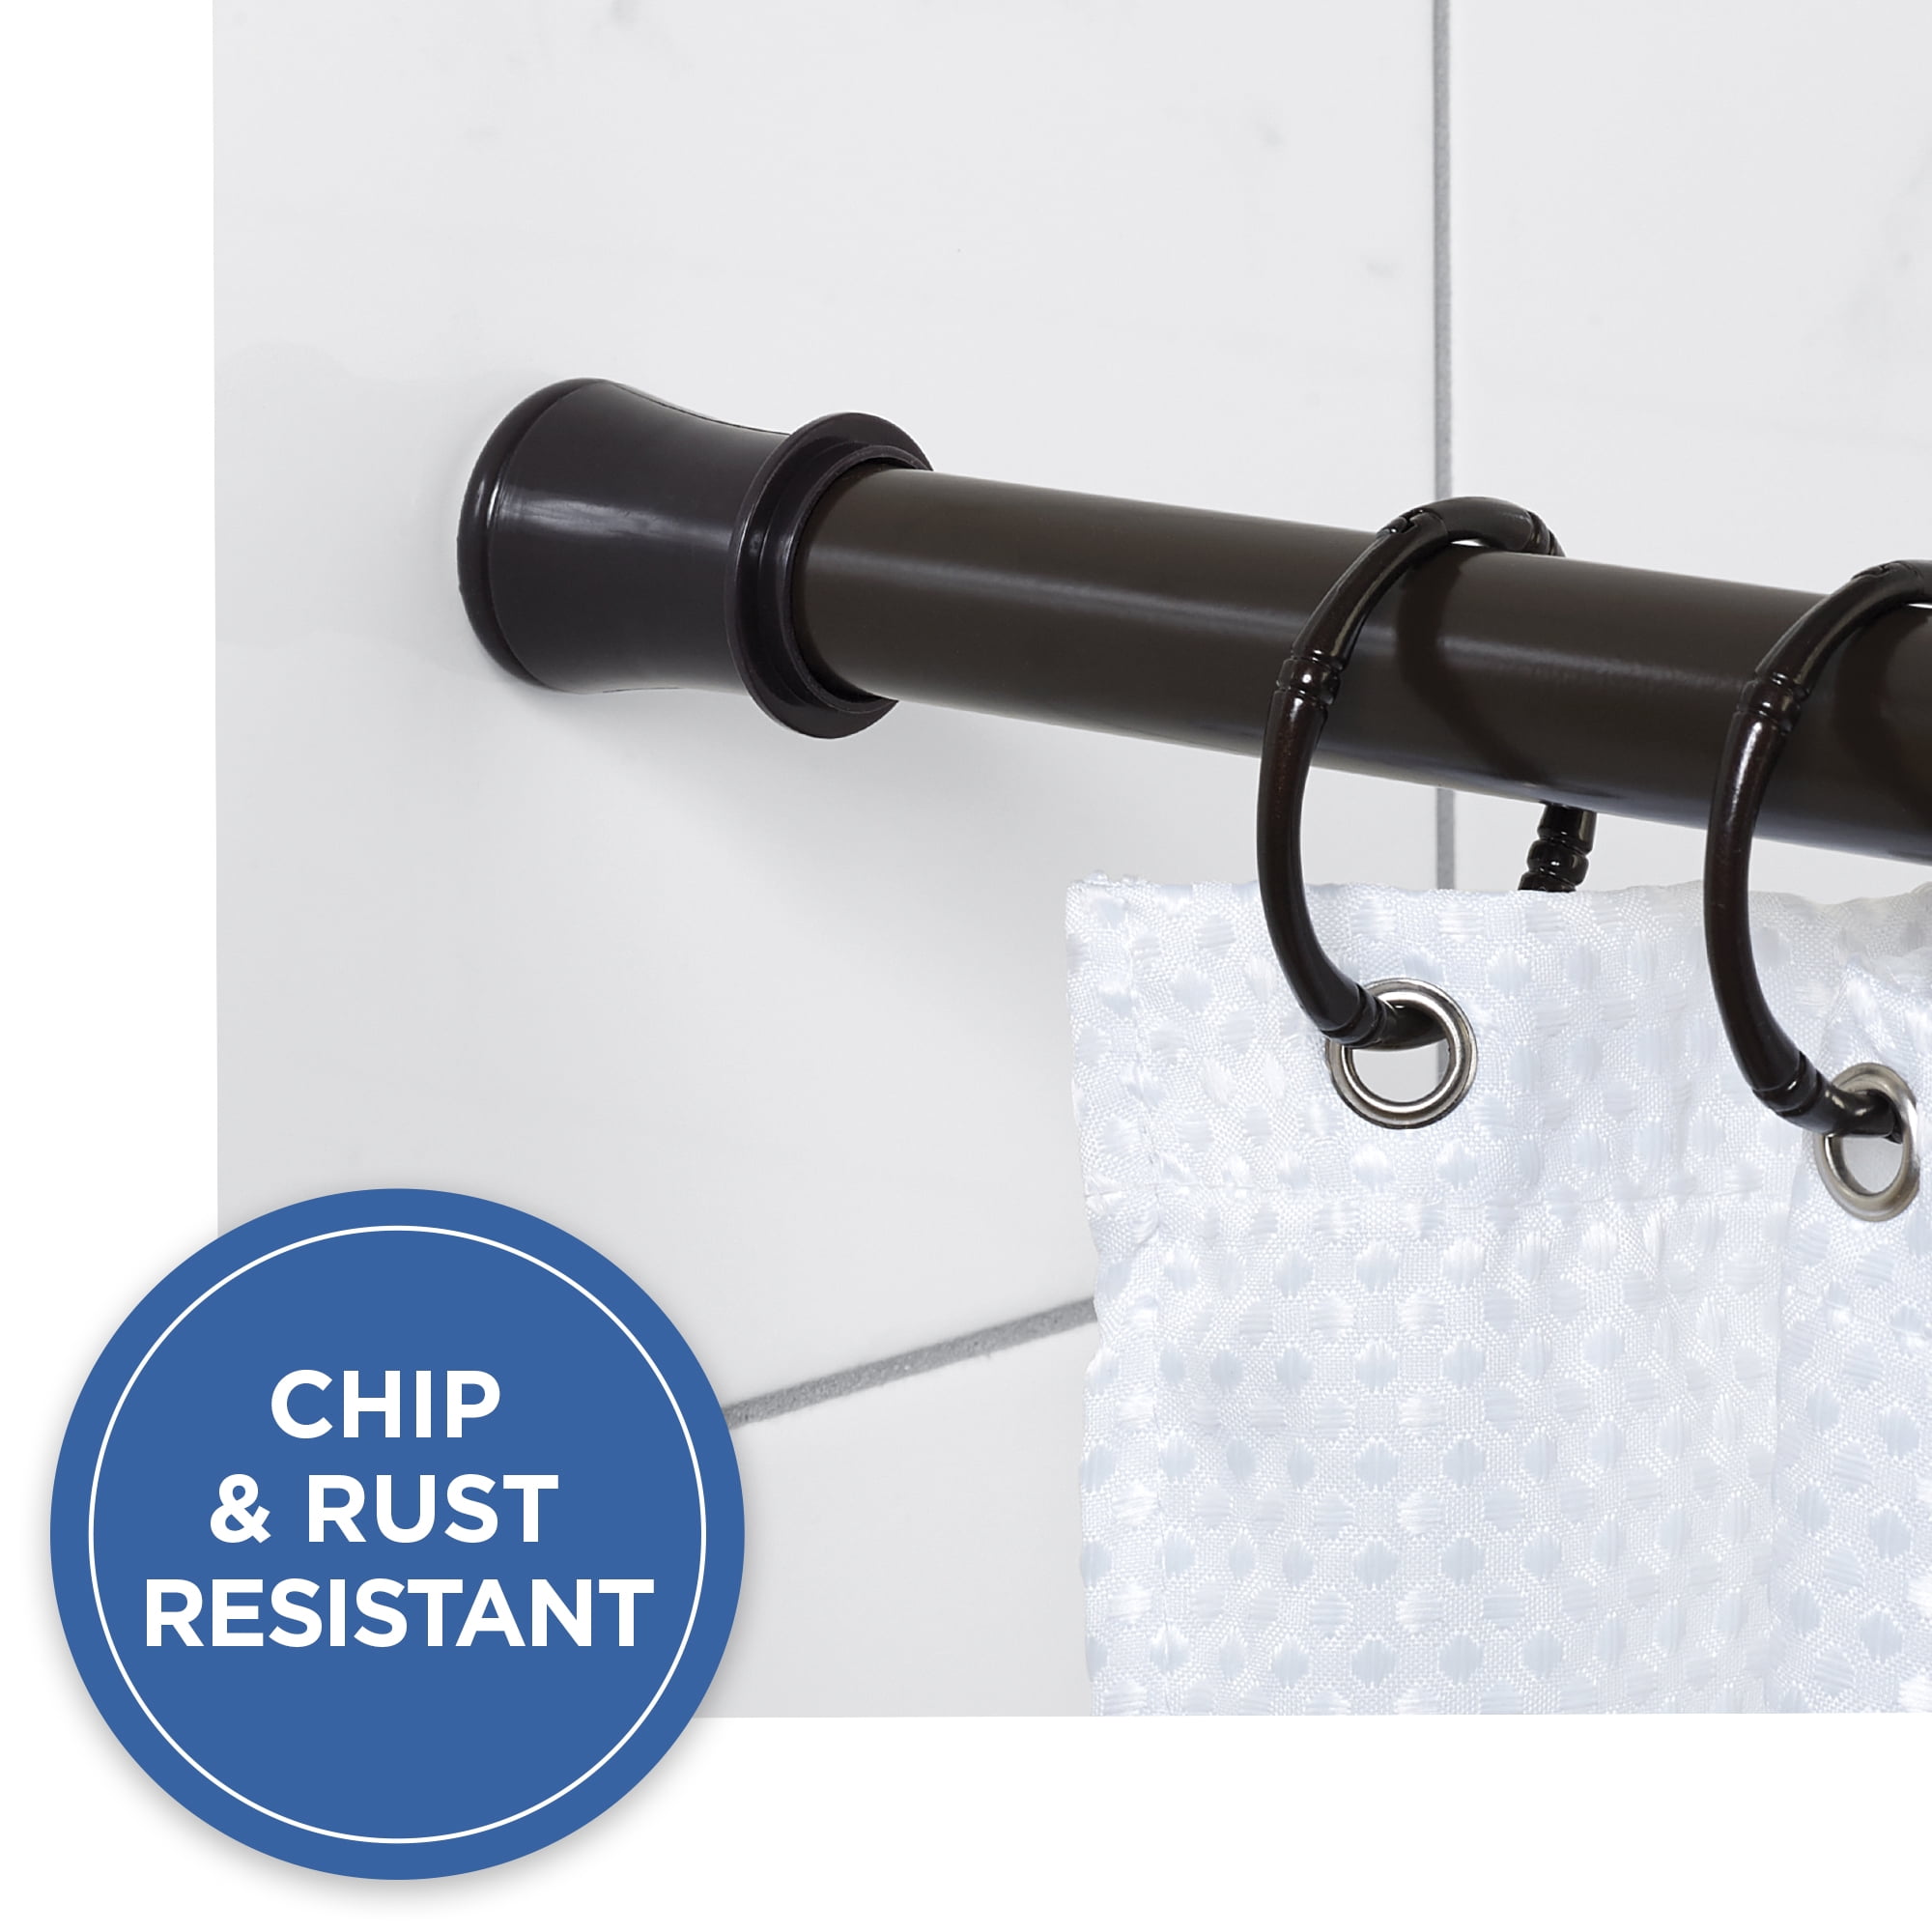 Mainstays Easy Hang Shower Curtain Tension Rod, Adjustable 44" - 72", Oil Rubbed Bronze